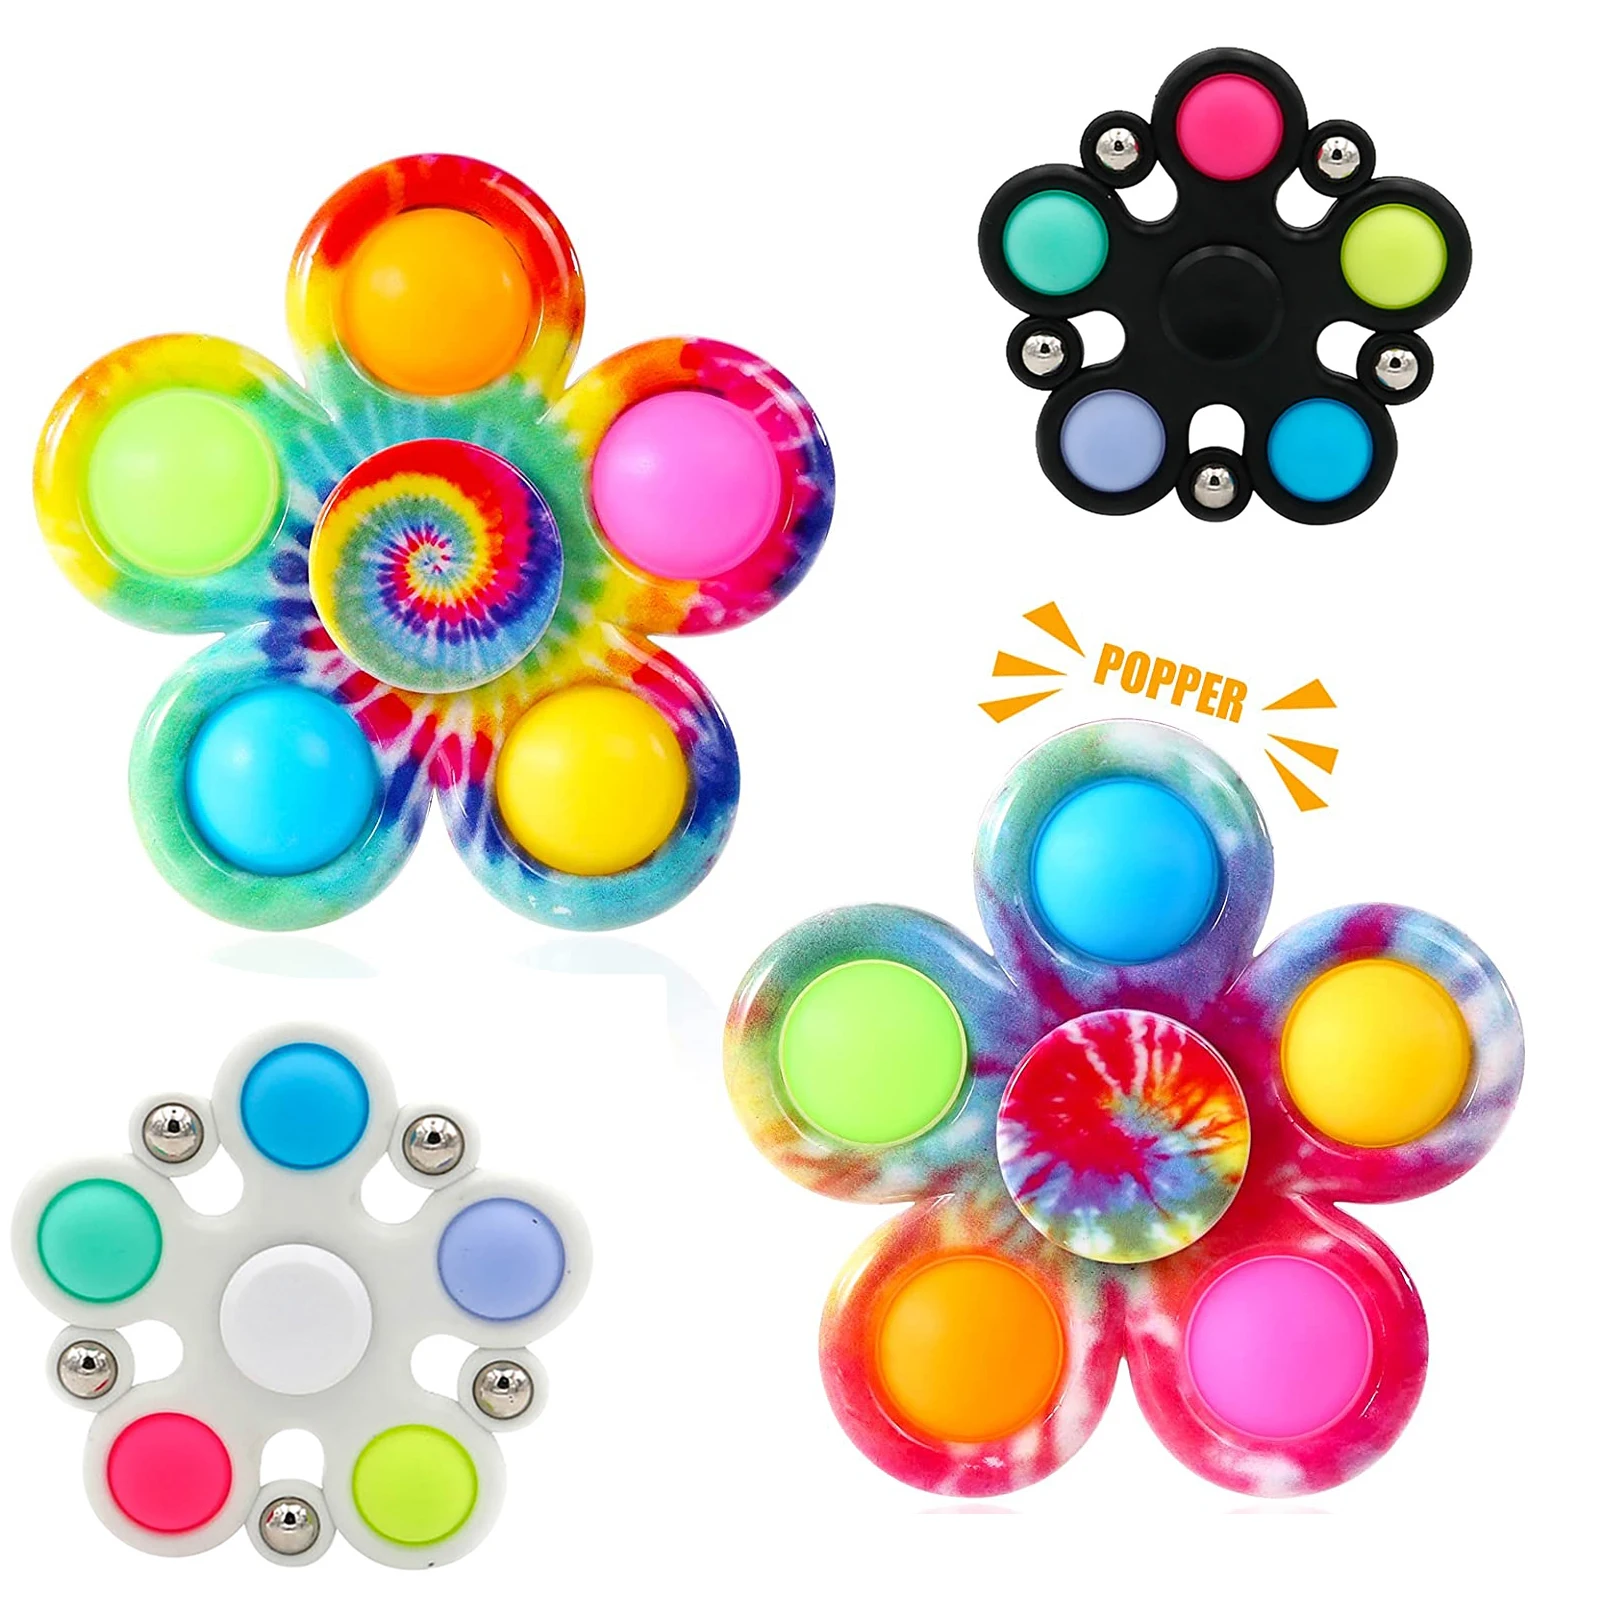 

Tie Dye Simple Fidget Spinner Push Pops Its Bubble Hand Spinner For Adhd Anxiety Stress Relief Bulk Sensory Party Favor For Kids